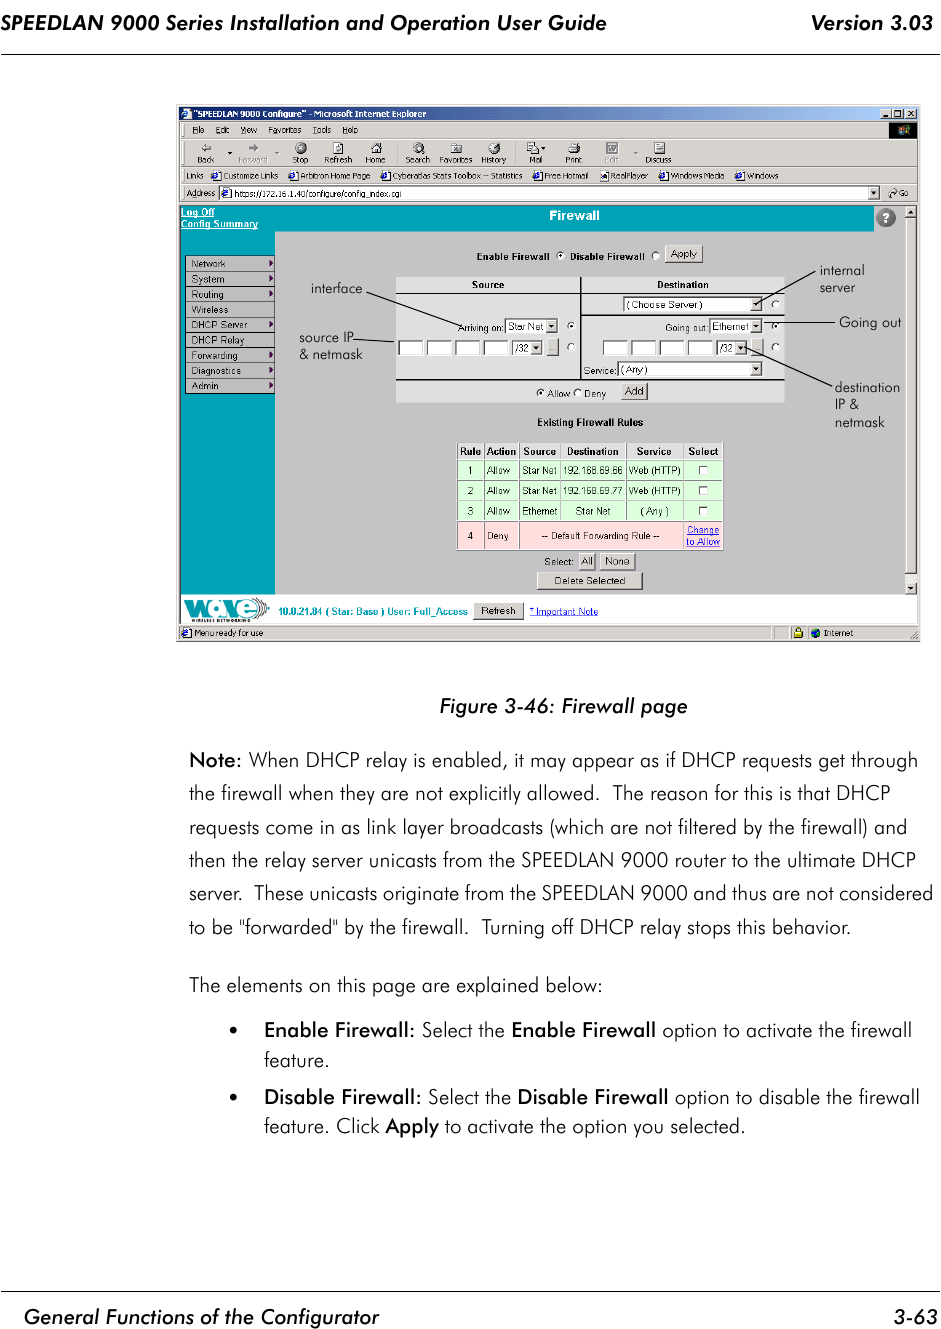 SPEEDLAN 9000 Series Installation and Operation User Guide                                 Version 3.03     General Functions of the Configurator 3-63                                                                                                                                                              Figure 3-46: Firewall pageNote: When DHCP relay is enabled, it may appear as if DHCP requests get through the firewall when they are not explicitly allowed.  The reason for this is that DHCP requests come in as link layer broadcasts (which are not filtered by the firewall) and then the relay server unicasts from the SPEEDLAN 9000 router to the ultimate DHCP server.  These unicasts originate from the SPEEDLAN 9000 and thus are not considered to be &quot;forwarded&quot; by the firewall.  Turning off DHCP relay stops this behavior.The elements on this page are explained below:•Enable Firewall: Select the Enable Firewall option to activate the firewall feature.•Disable Firewall: Select the Disable Firewall option to disable the firewall feature. Click Apply to activate the option you selected.interfacesource IPinternalserverGoing outdestinationIP &amp; netmask&amp; netmask